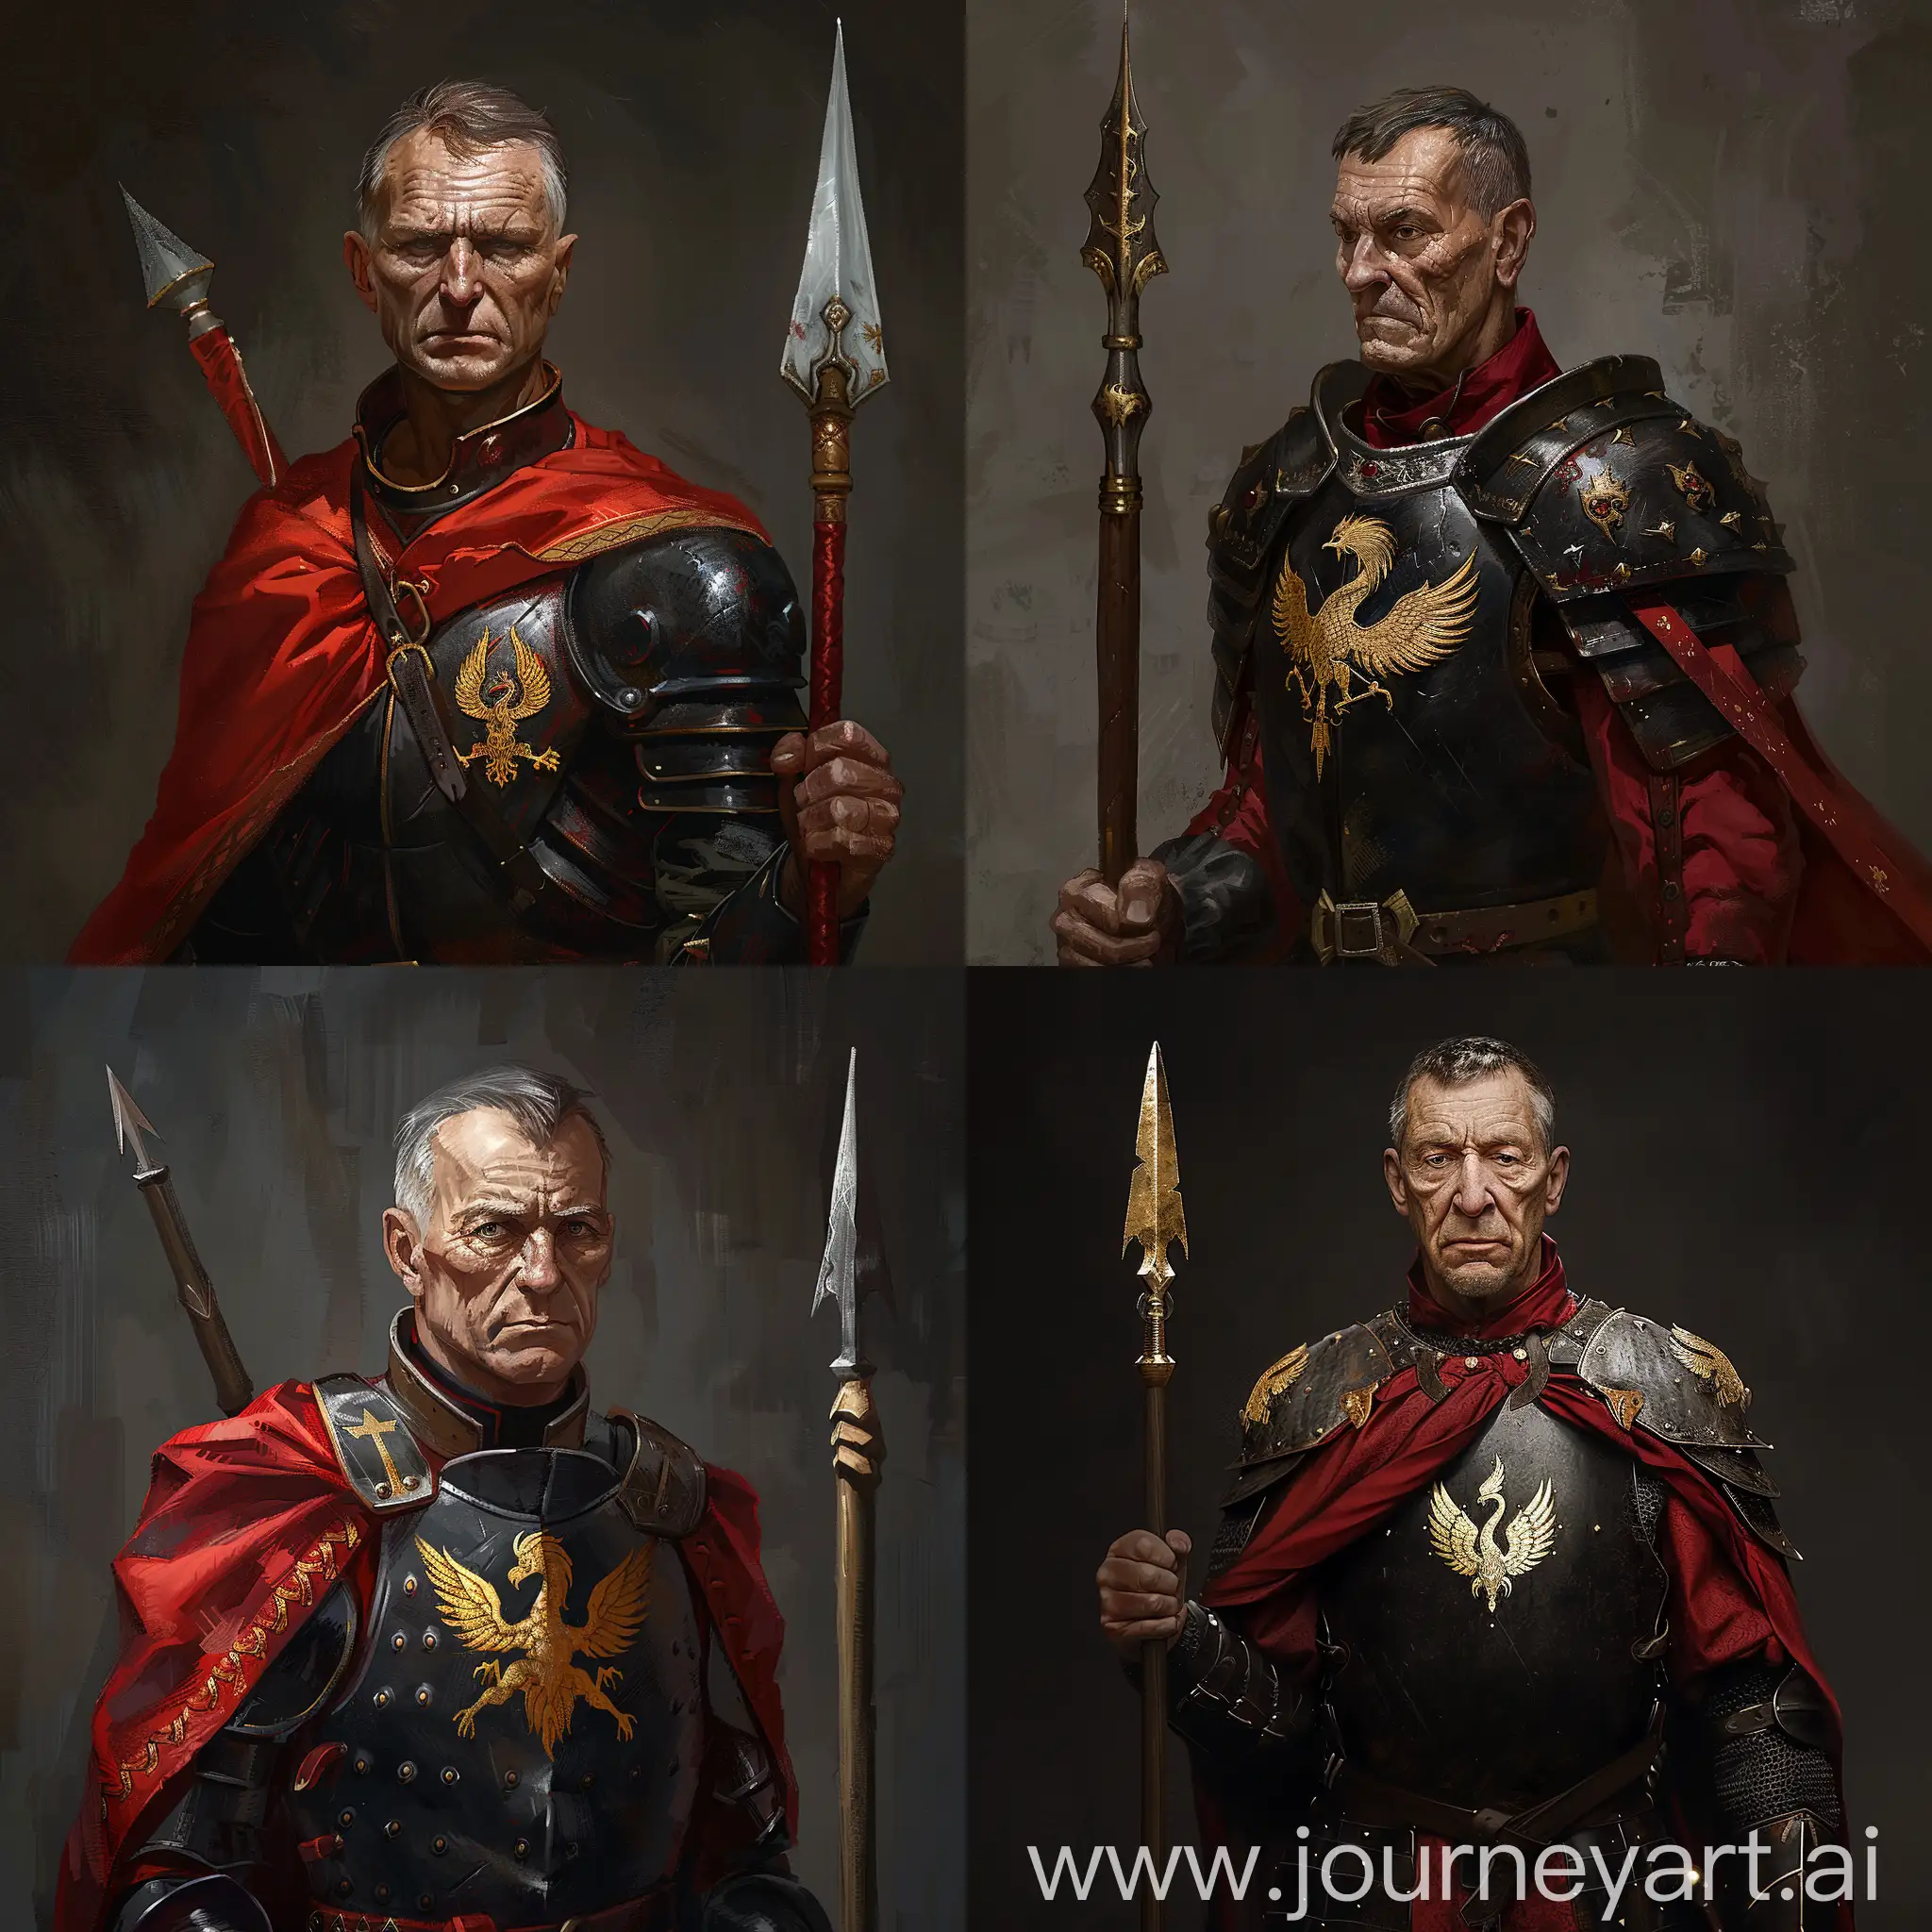 Fantasy guard, dark iron armor with red fabric, gold phoenix crest, no helmet, humble, older male, stern look, short hair, spear